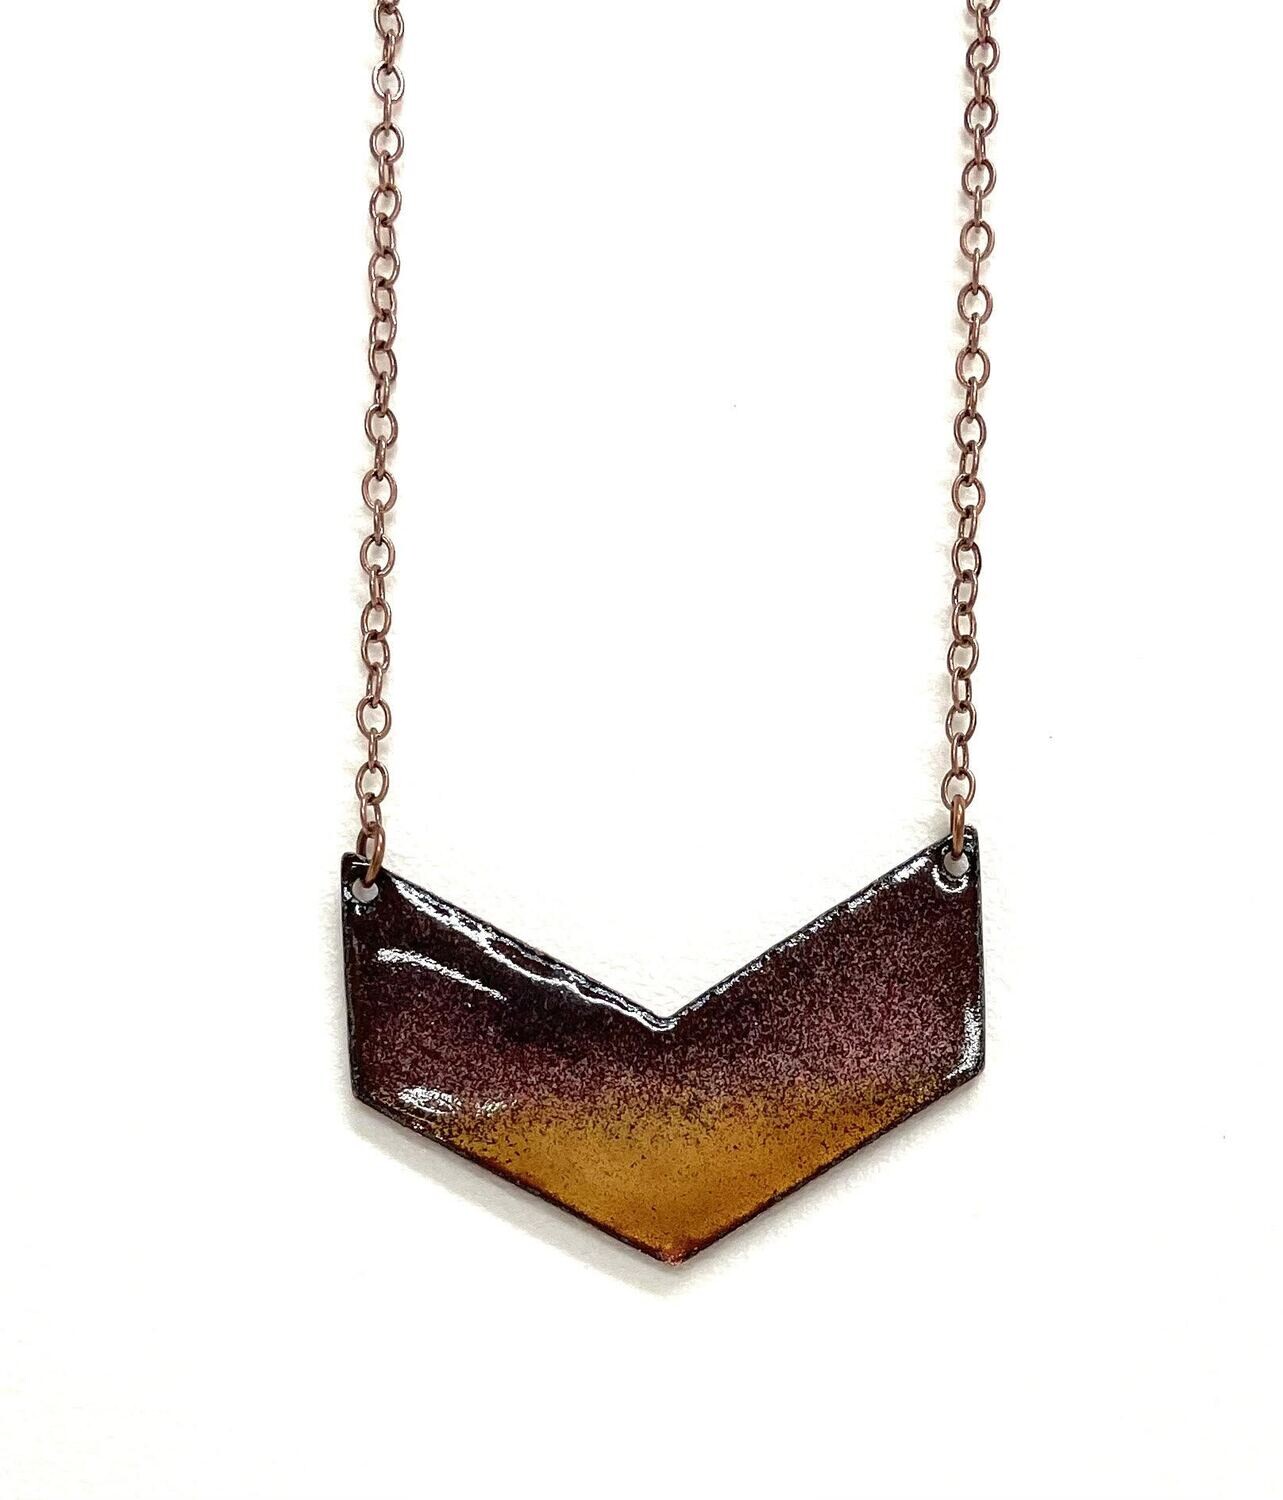 Plum and Amber Horizon Chevron Necklace - Aflame 